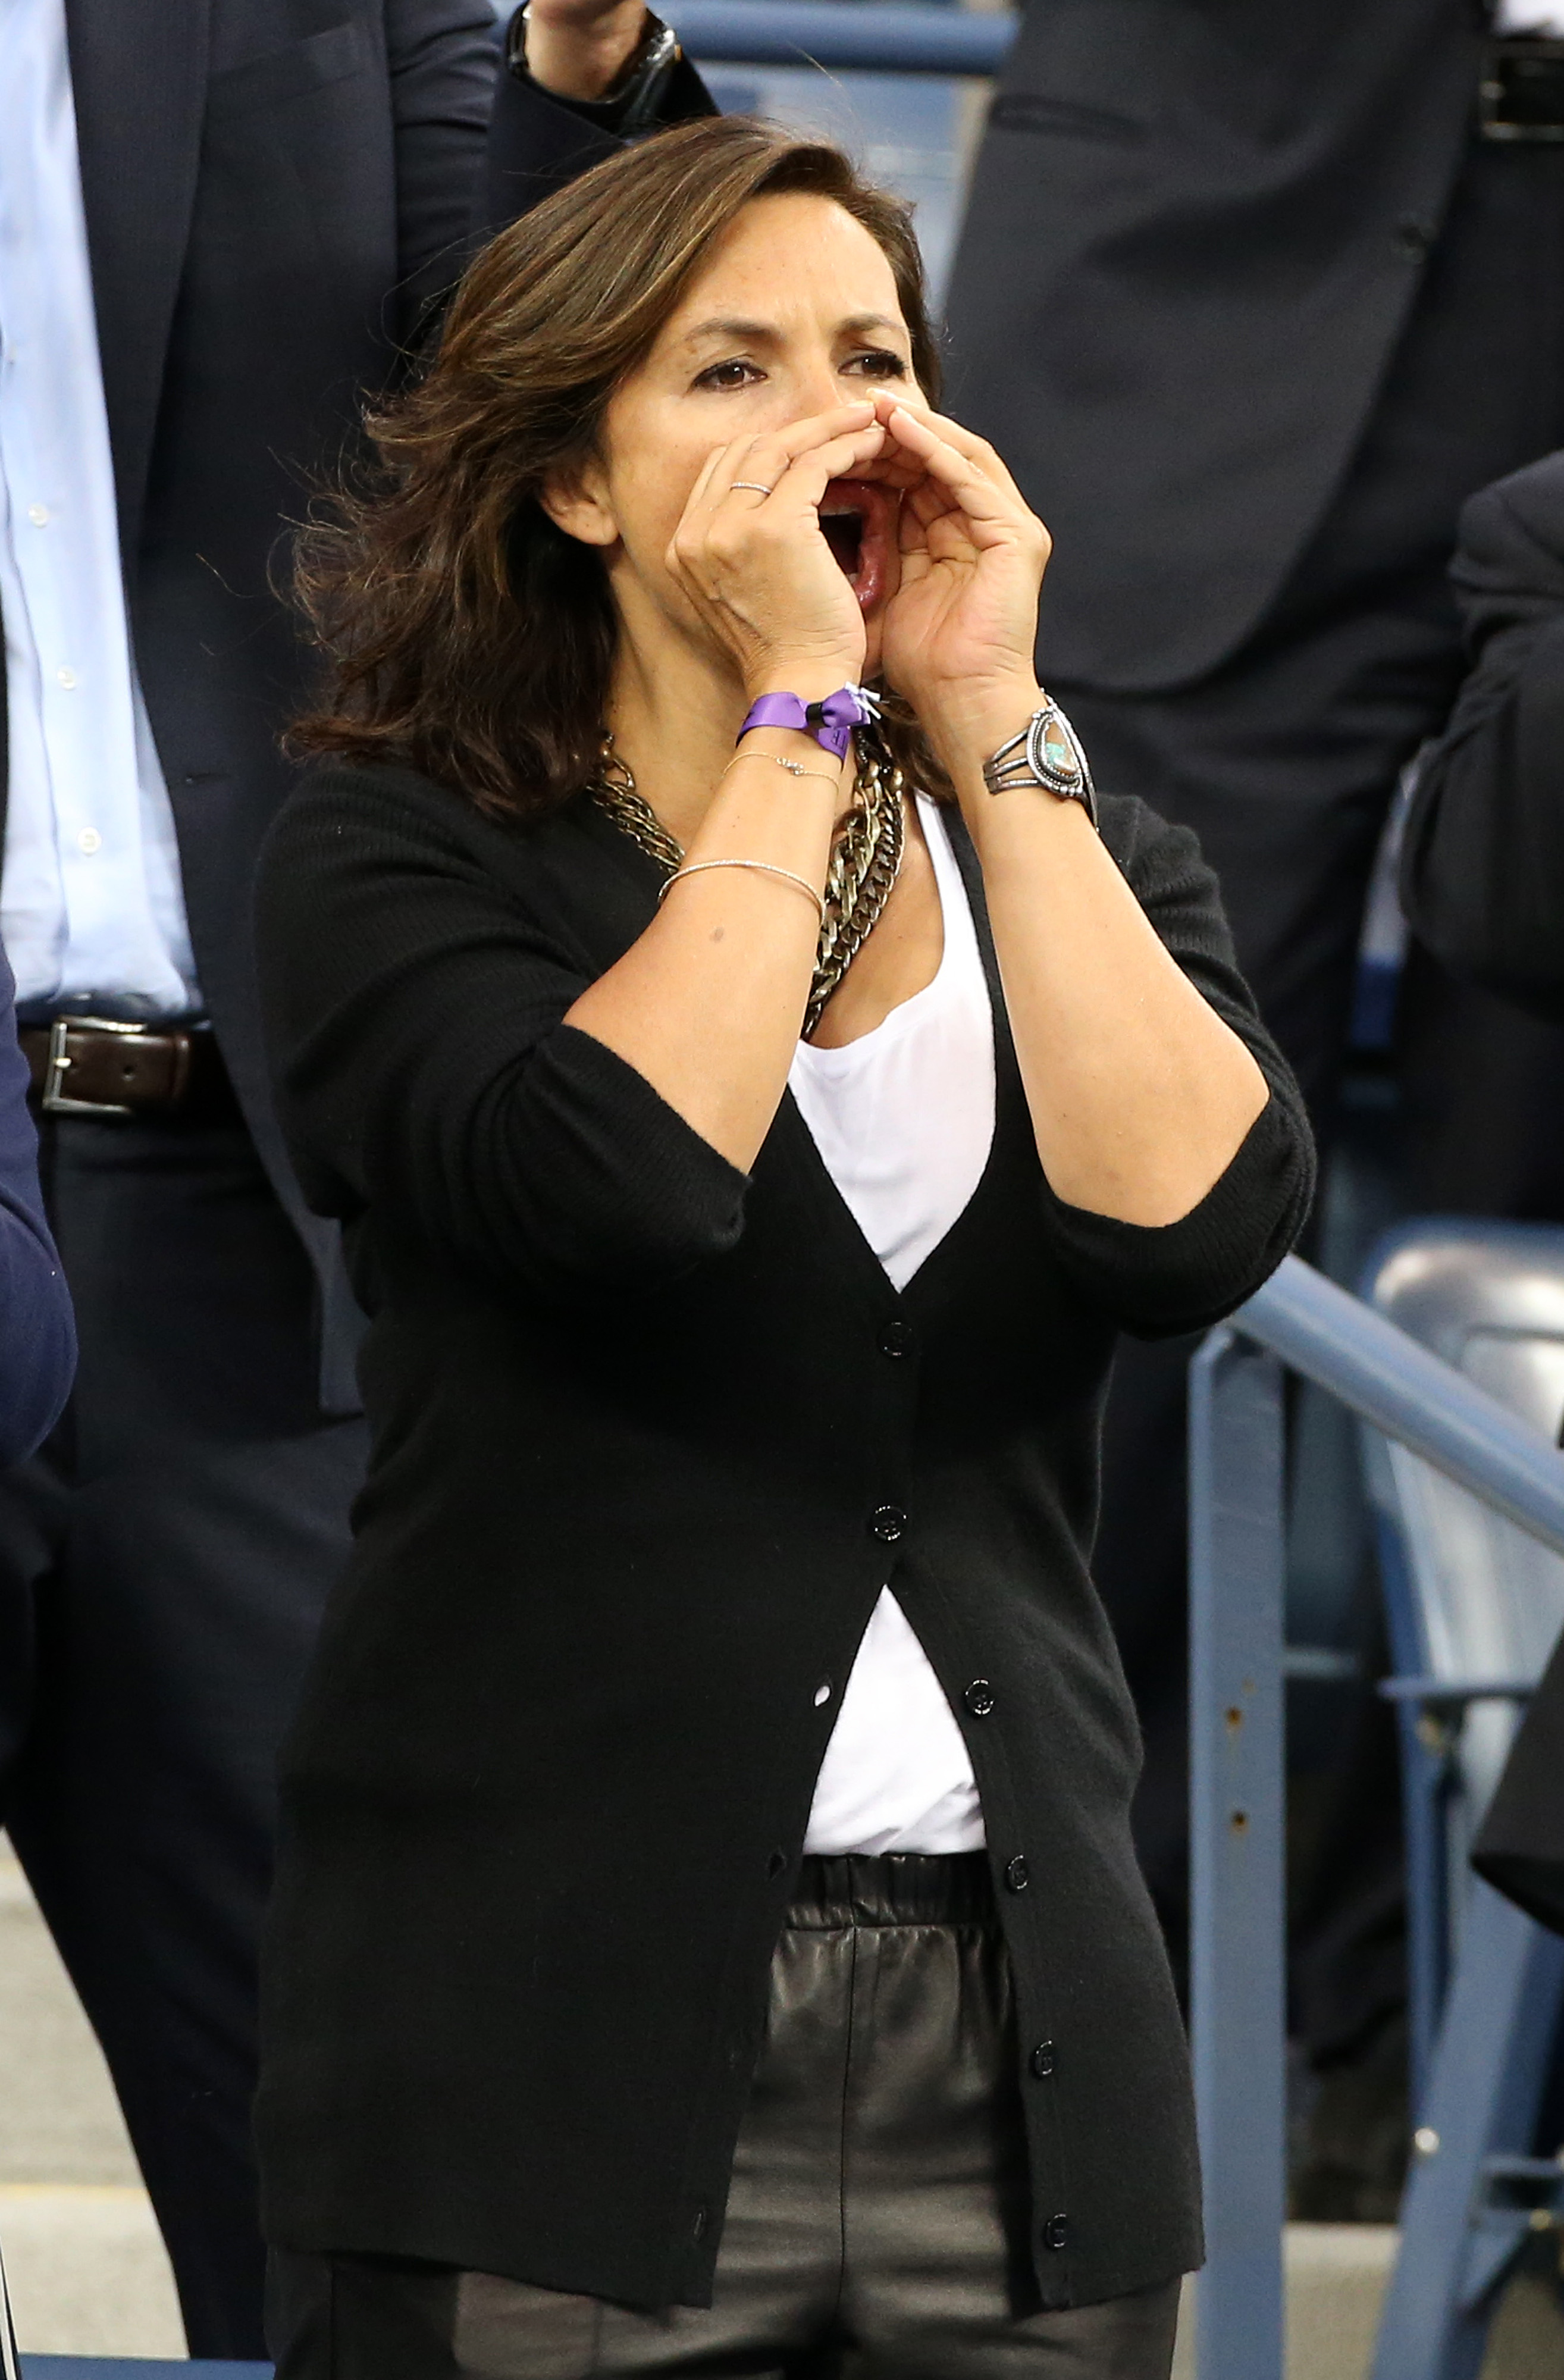 Mariska Hargitay at the men's final during Day 15 of the 2014 US Open held at the USTA Billie Jean King National Tennis Center | Source: Getty Images